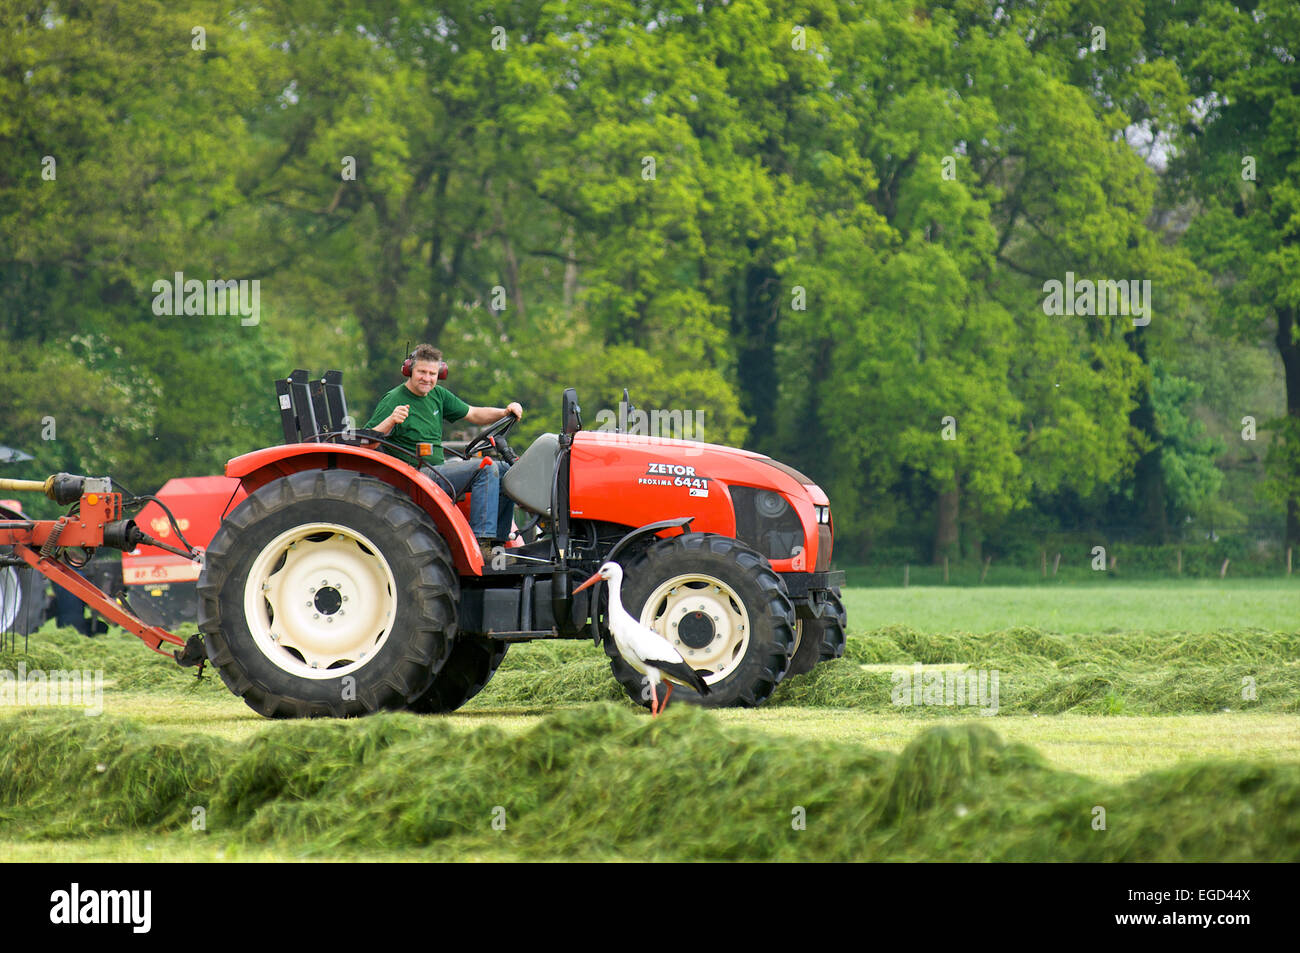 A farmer on his tractor is looking at a Stork who is looking for food in places where a tractor has been mowing the grass Stock Photo